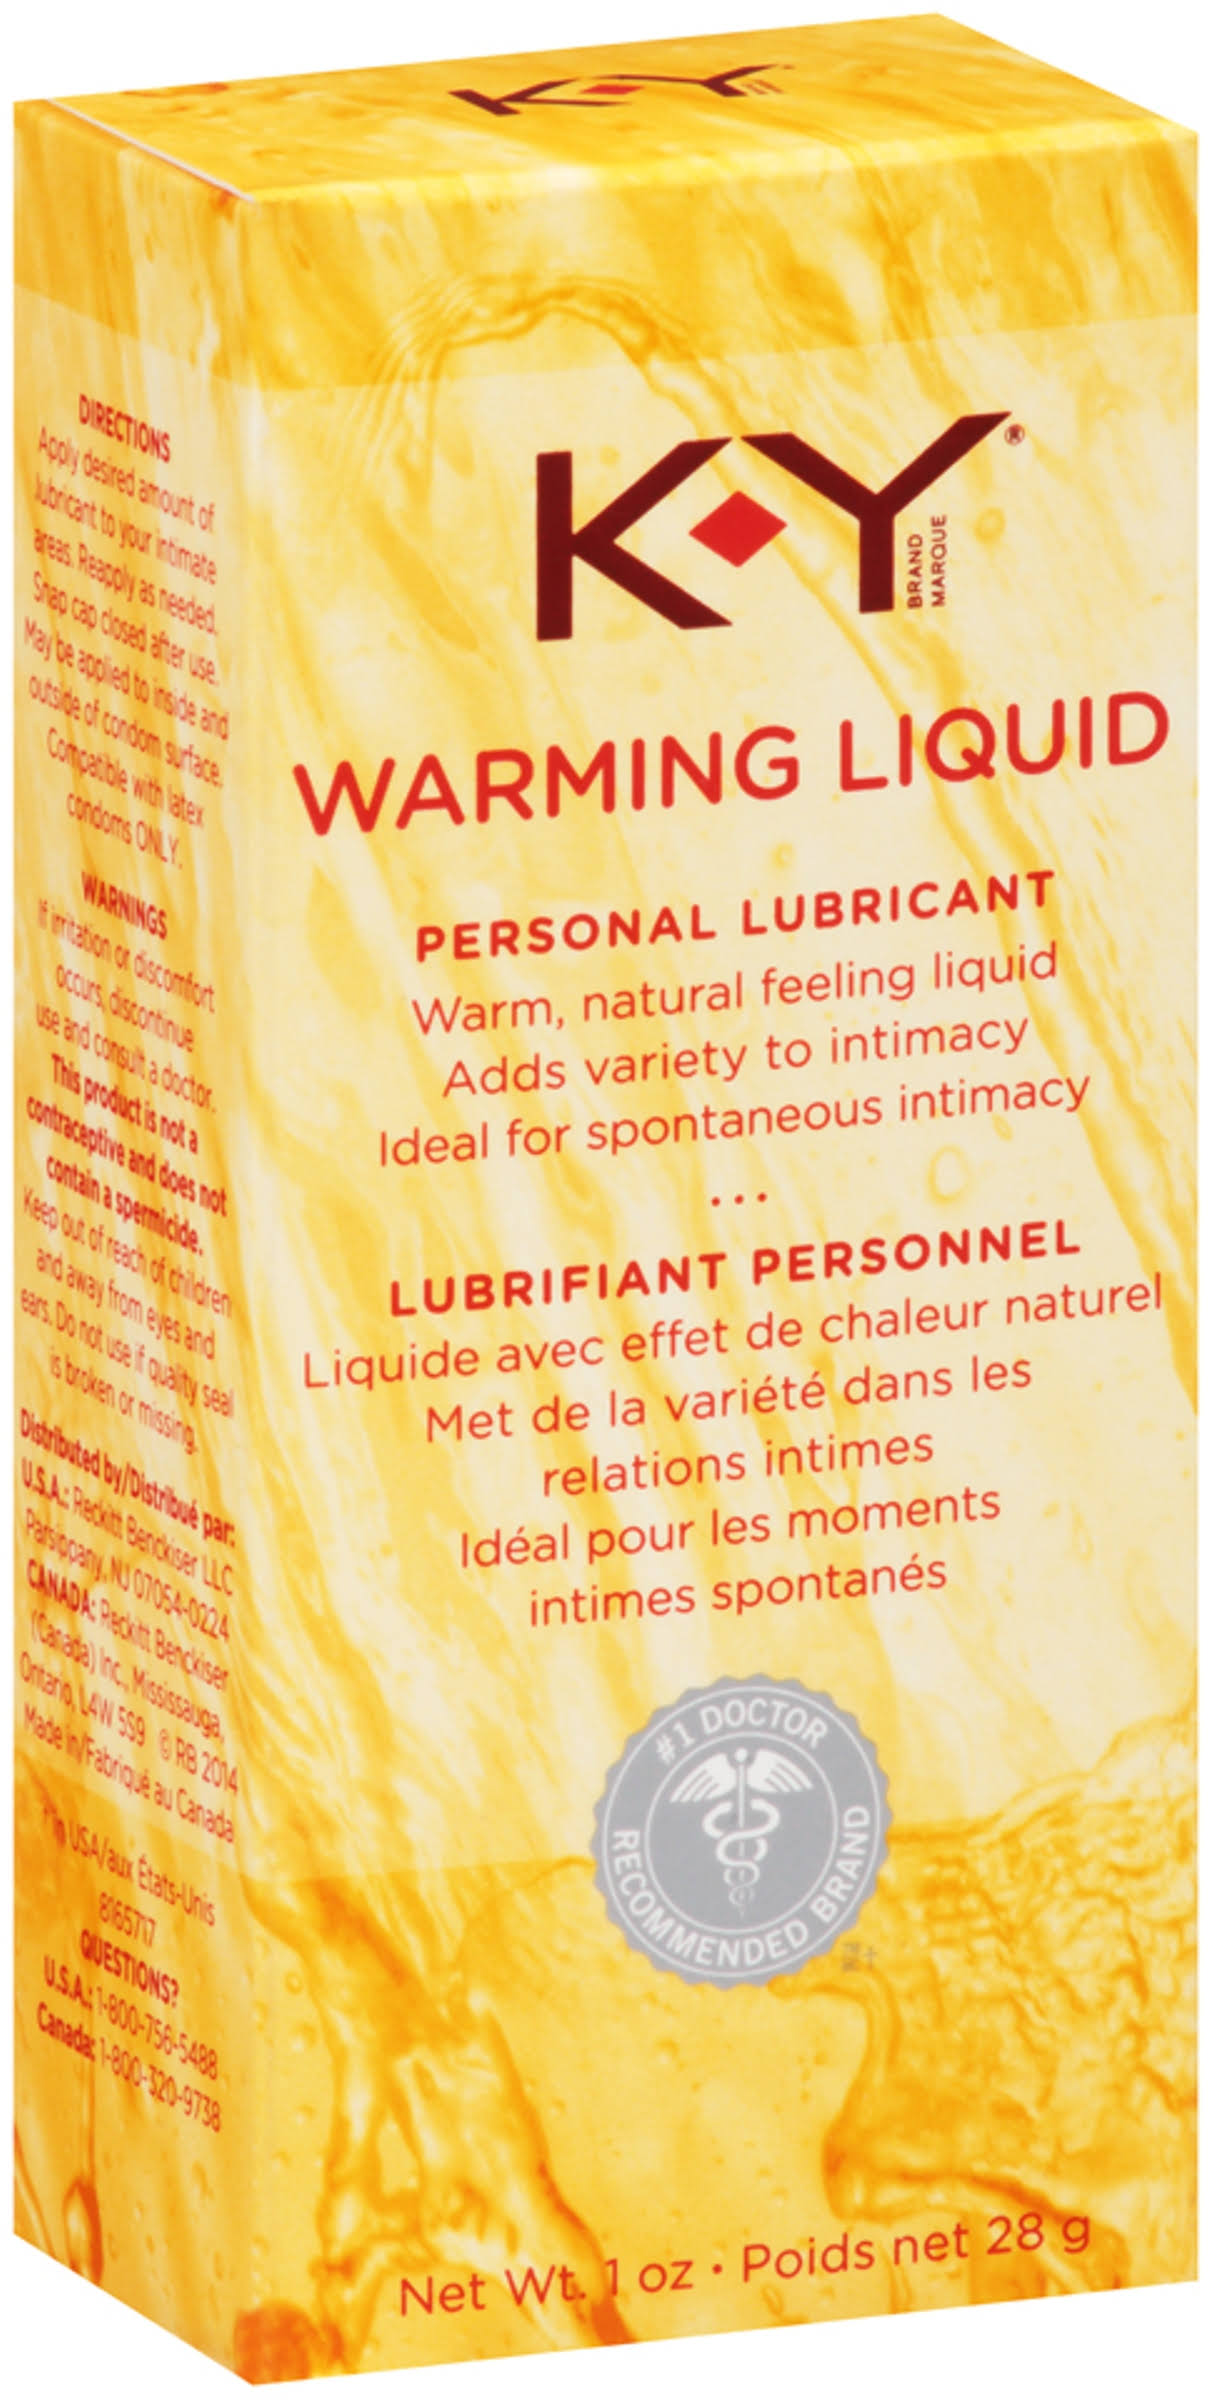 KY Warming Liquid Personal Lubricant